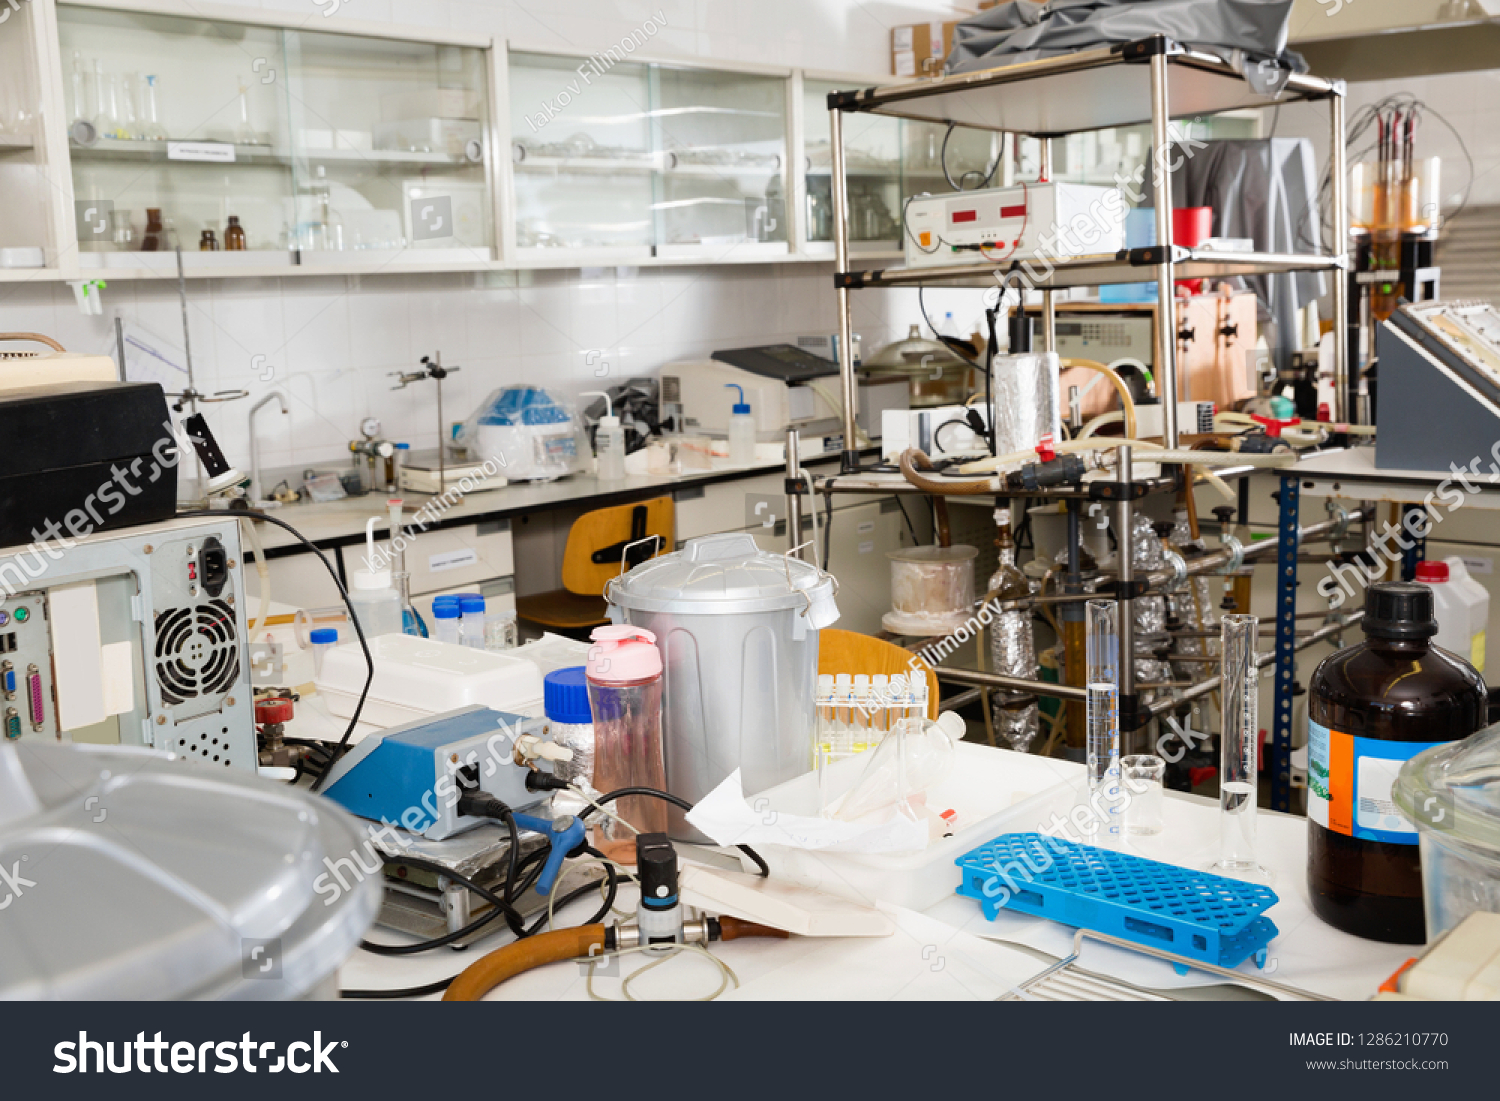 Interior of chemical laboratory equipped with different tools and facilities for scientific research #1286210770